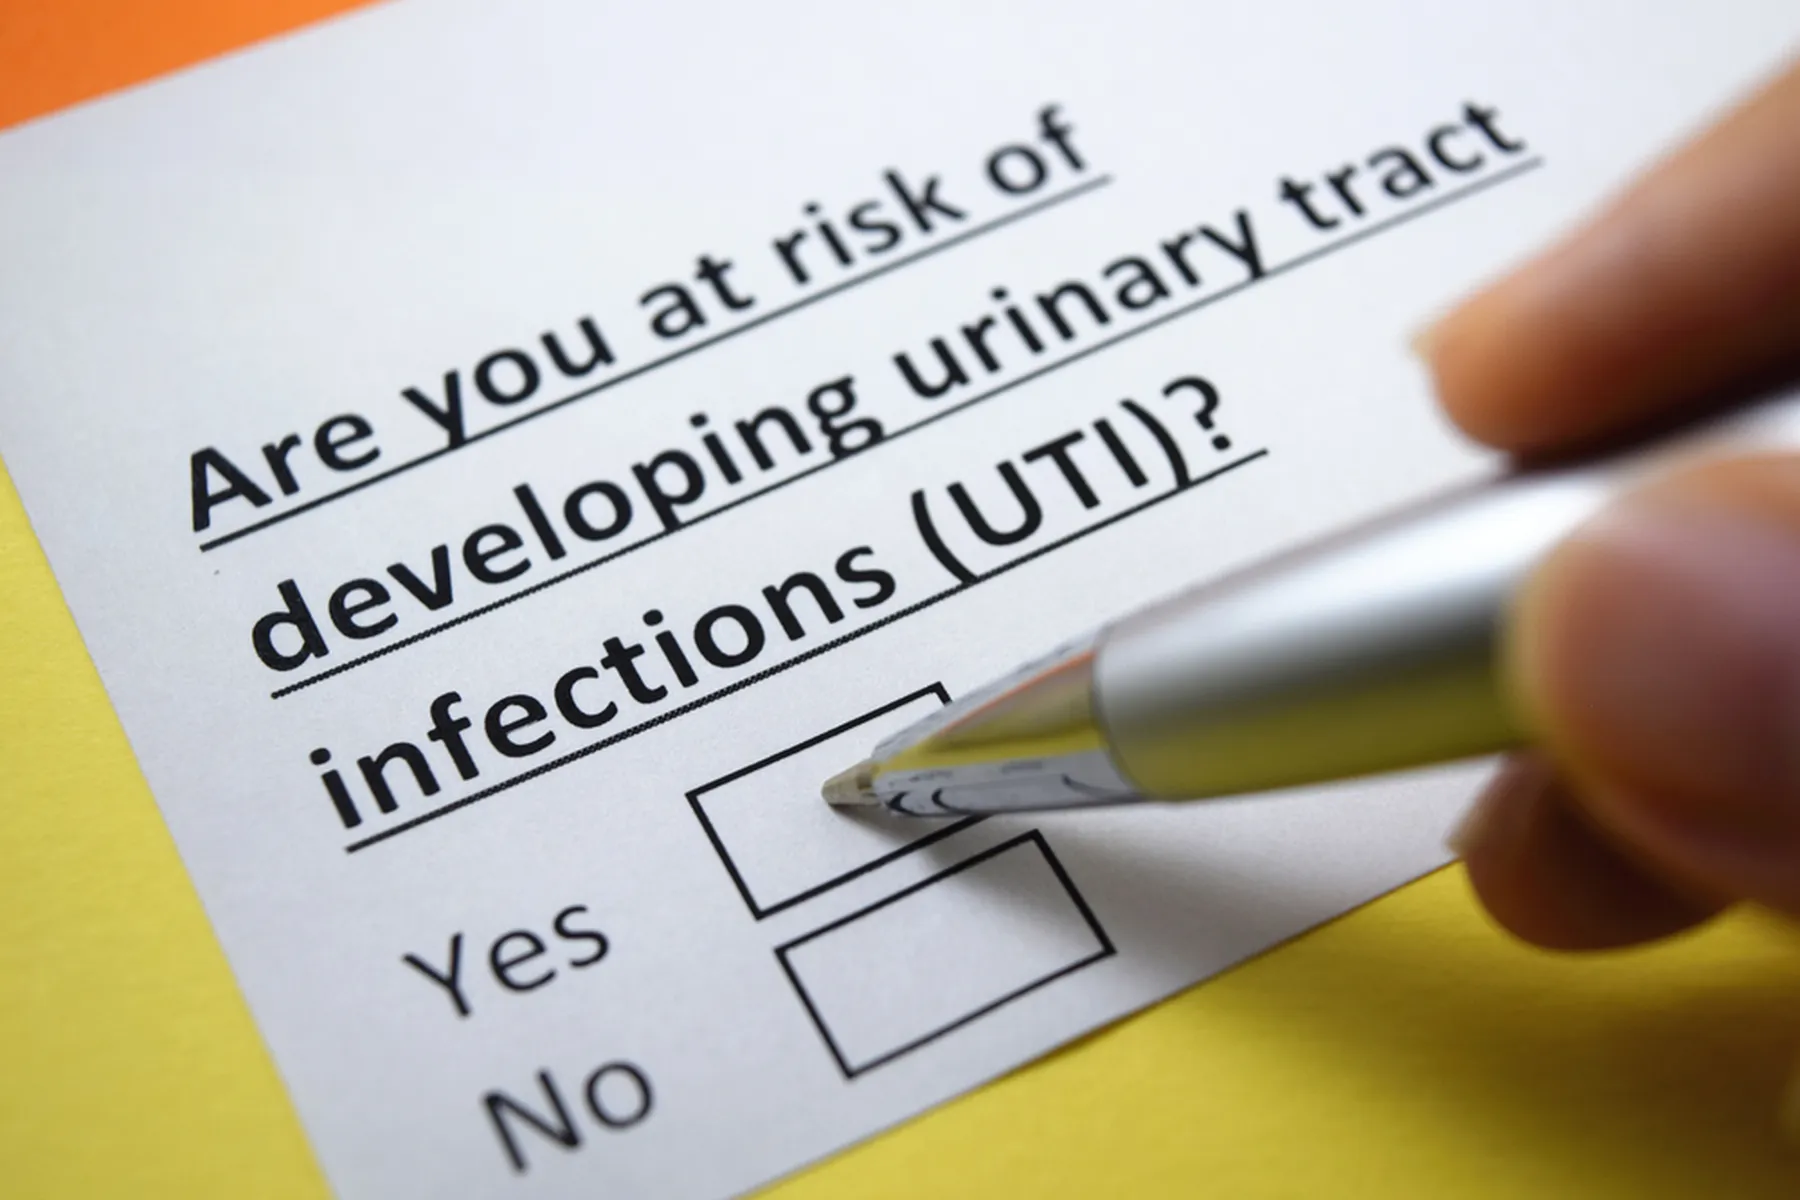 At risk of UTIs, check yes or no, with pen pointing to yes.